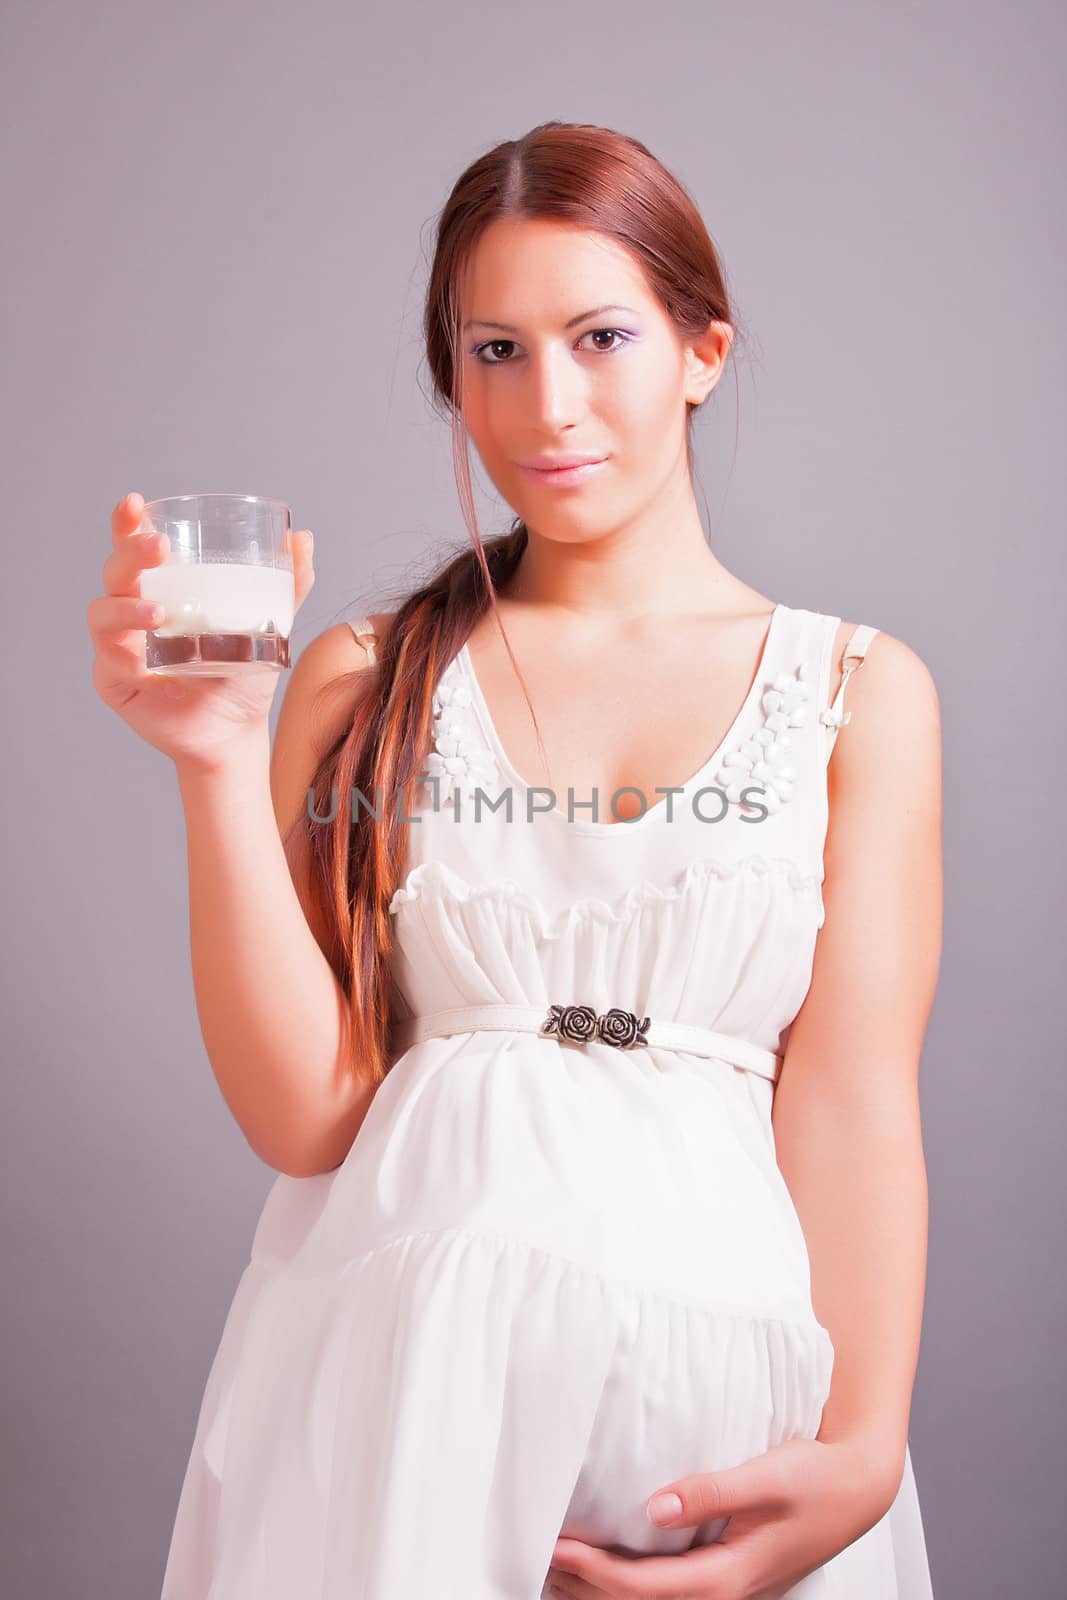 portrait of pregnant woman holding glass of milk